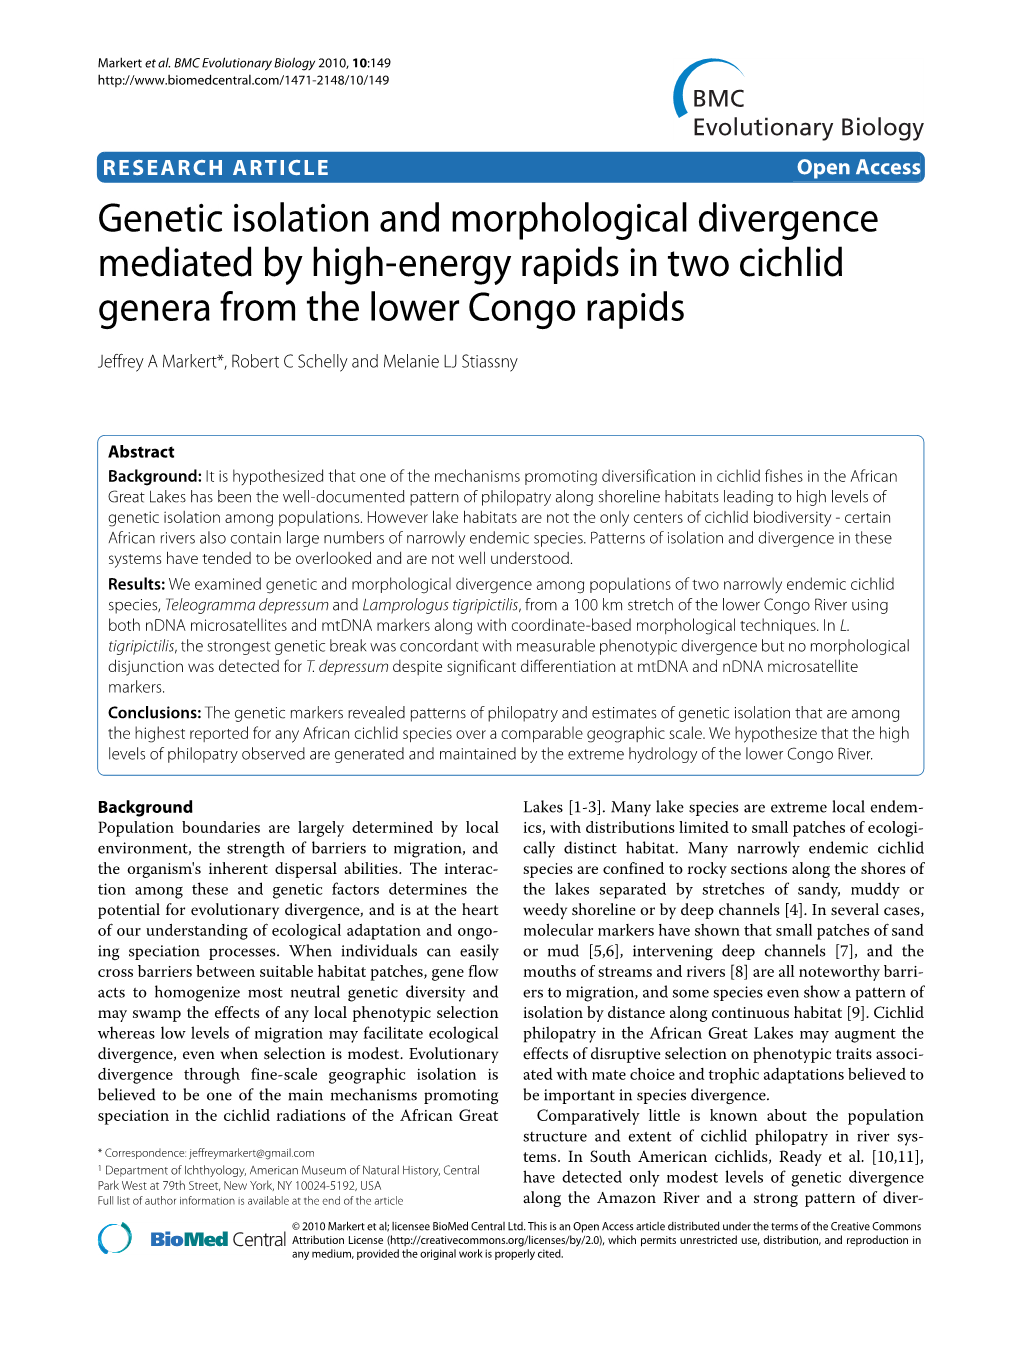 Genetic Isolation and Morphological Divergence Mediated by High